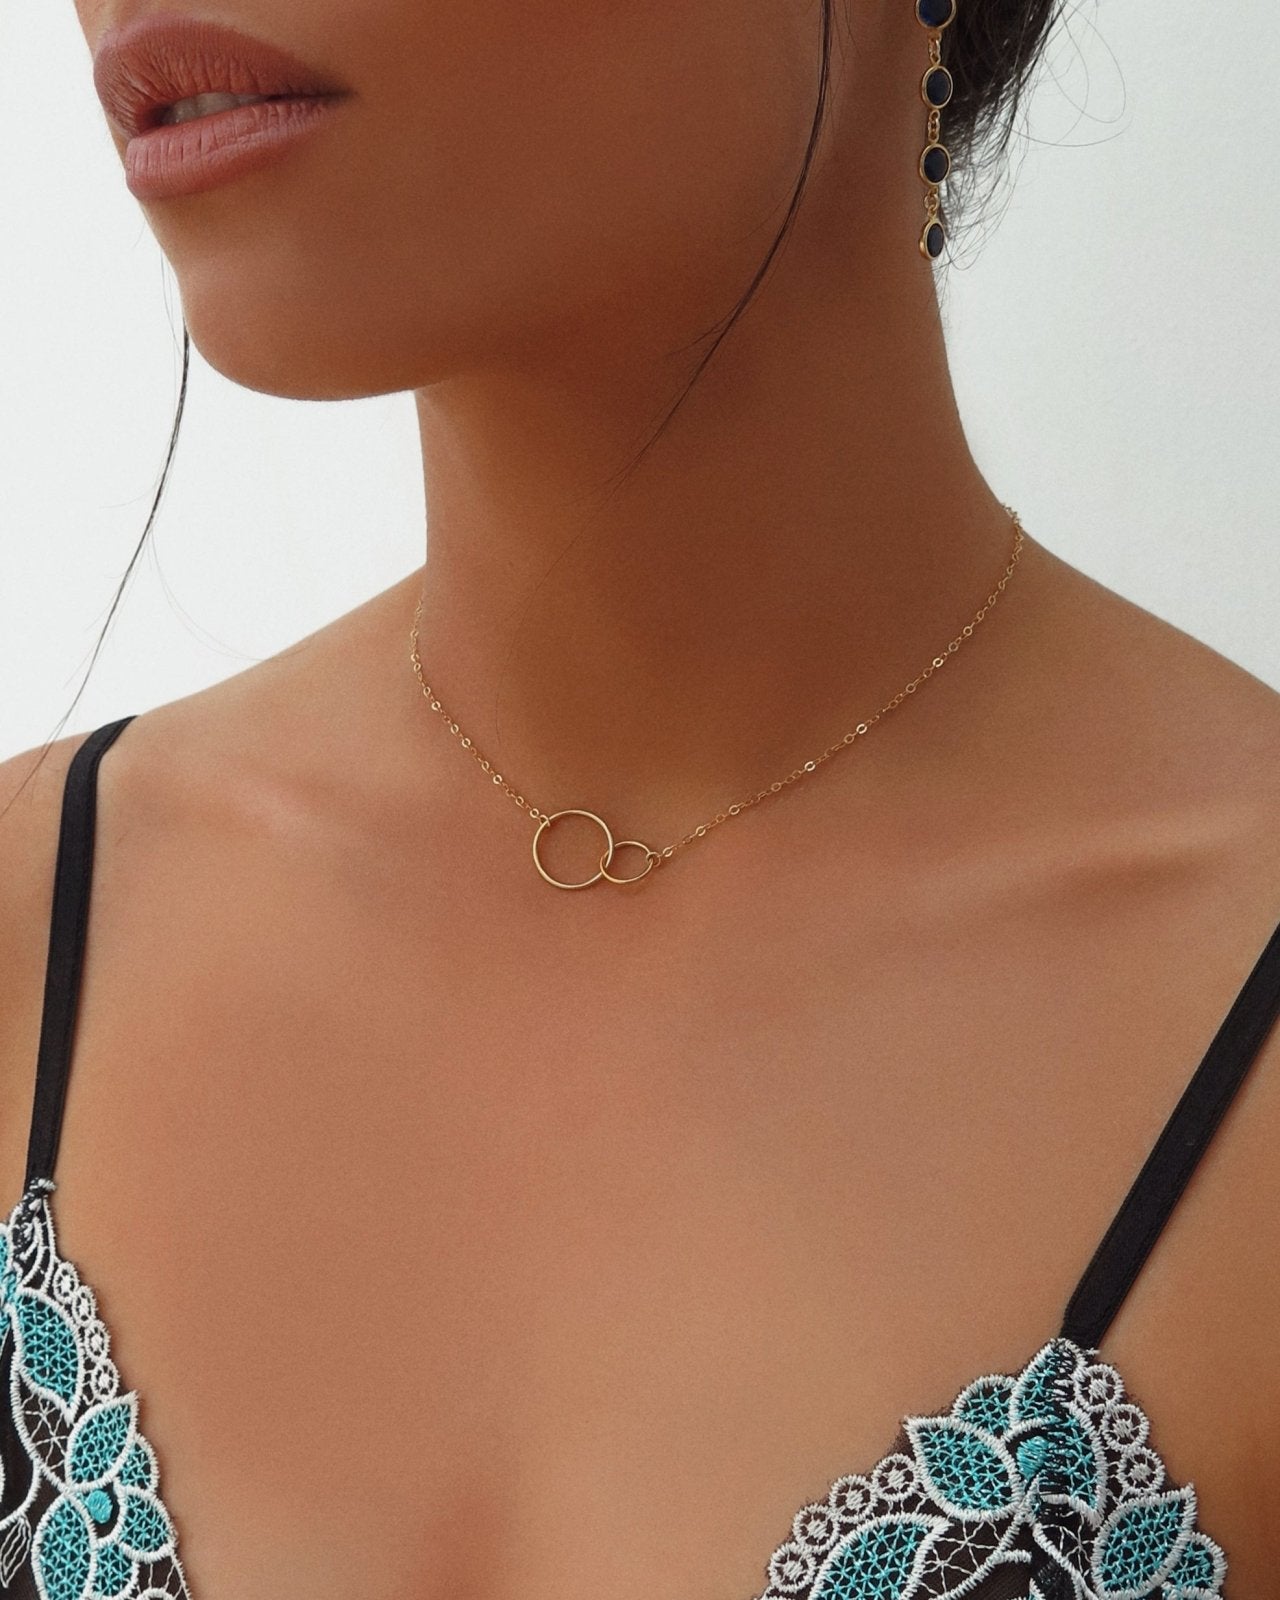 INTERLOCKING CIRCLES NECKLACE - The Littl - 14k Yellow Gold Fill - Deluxe Chain